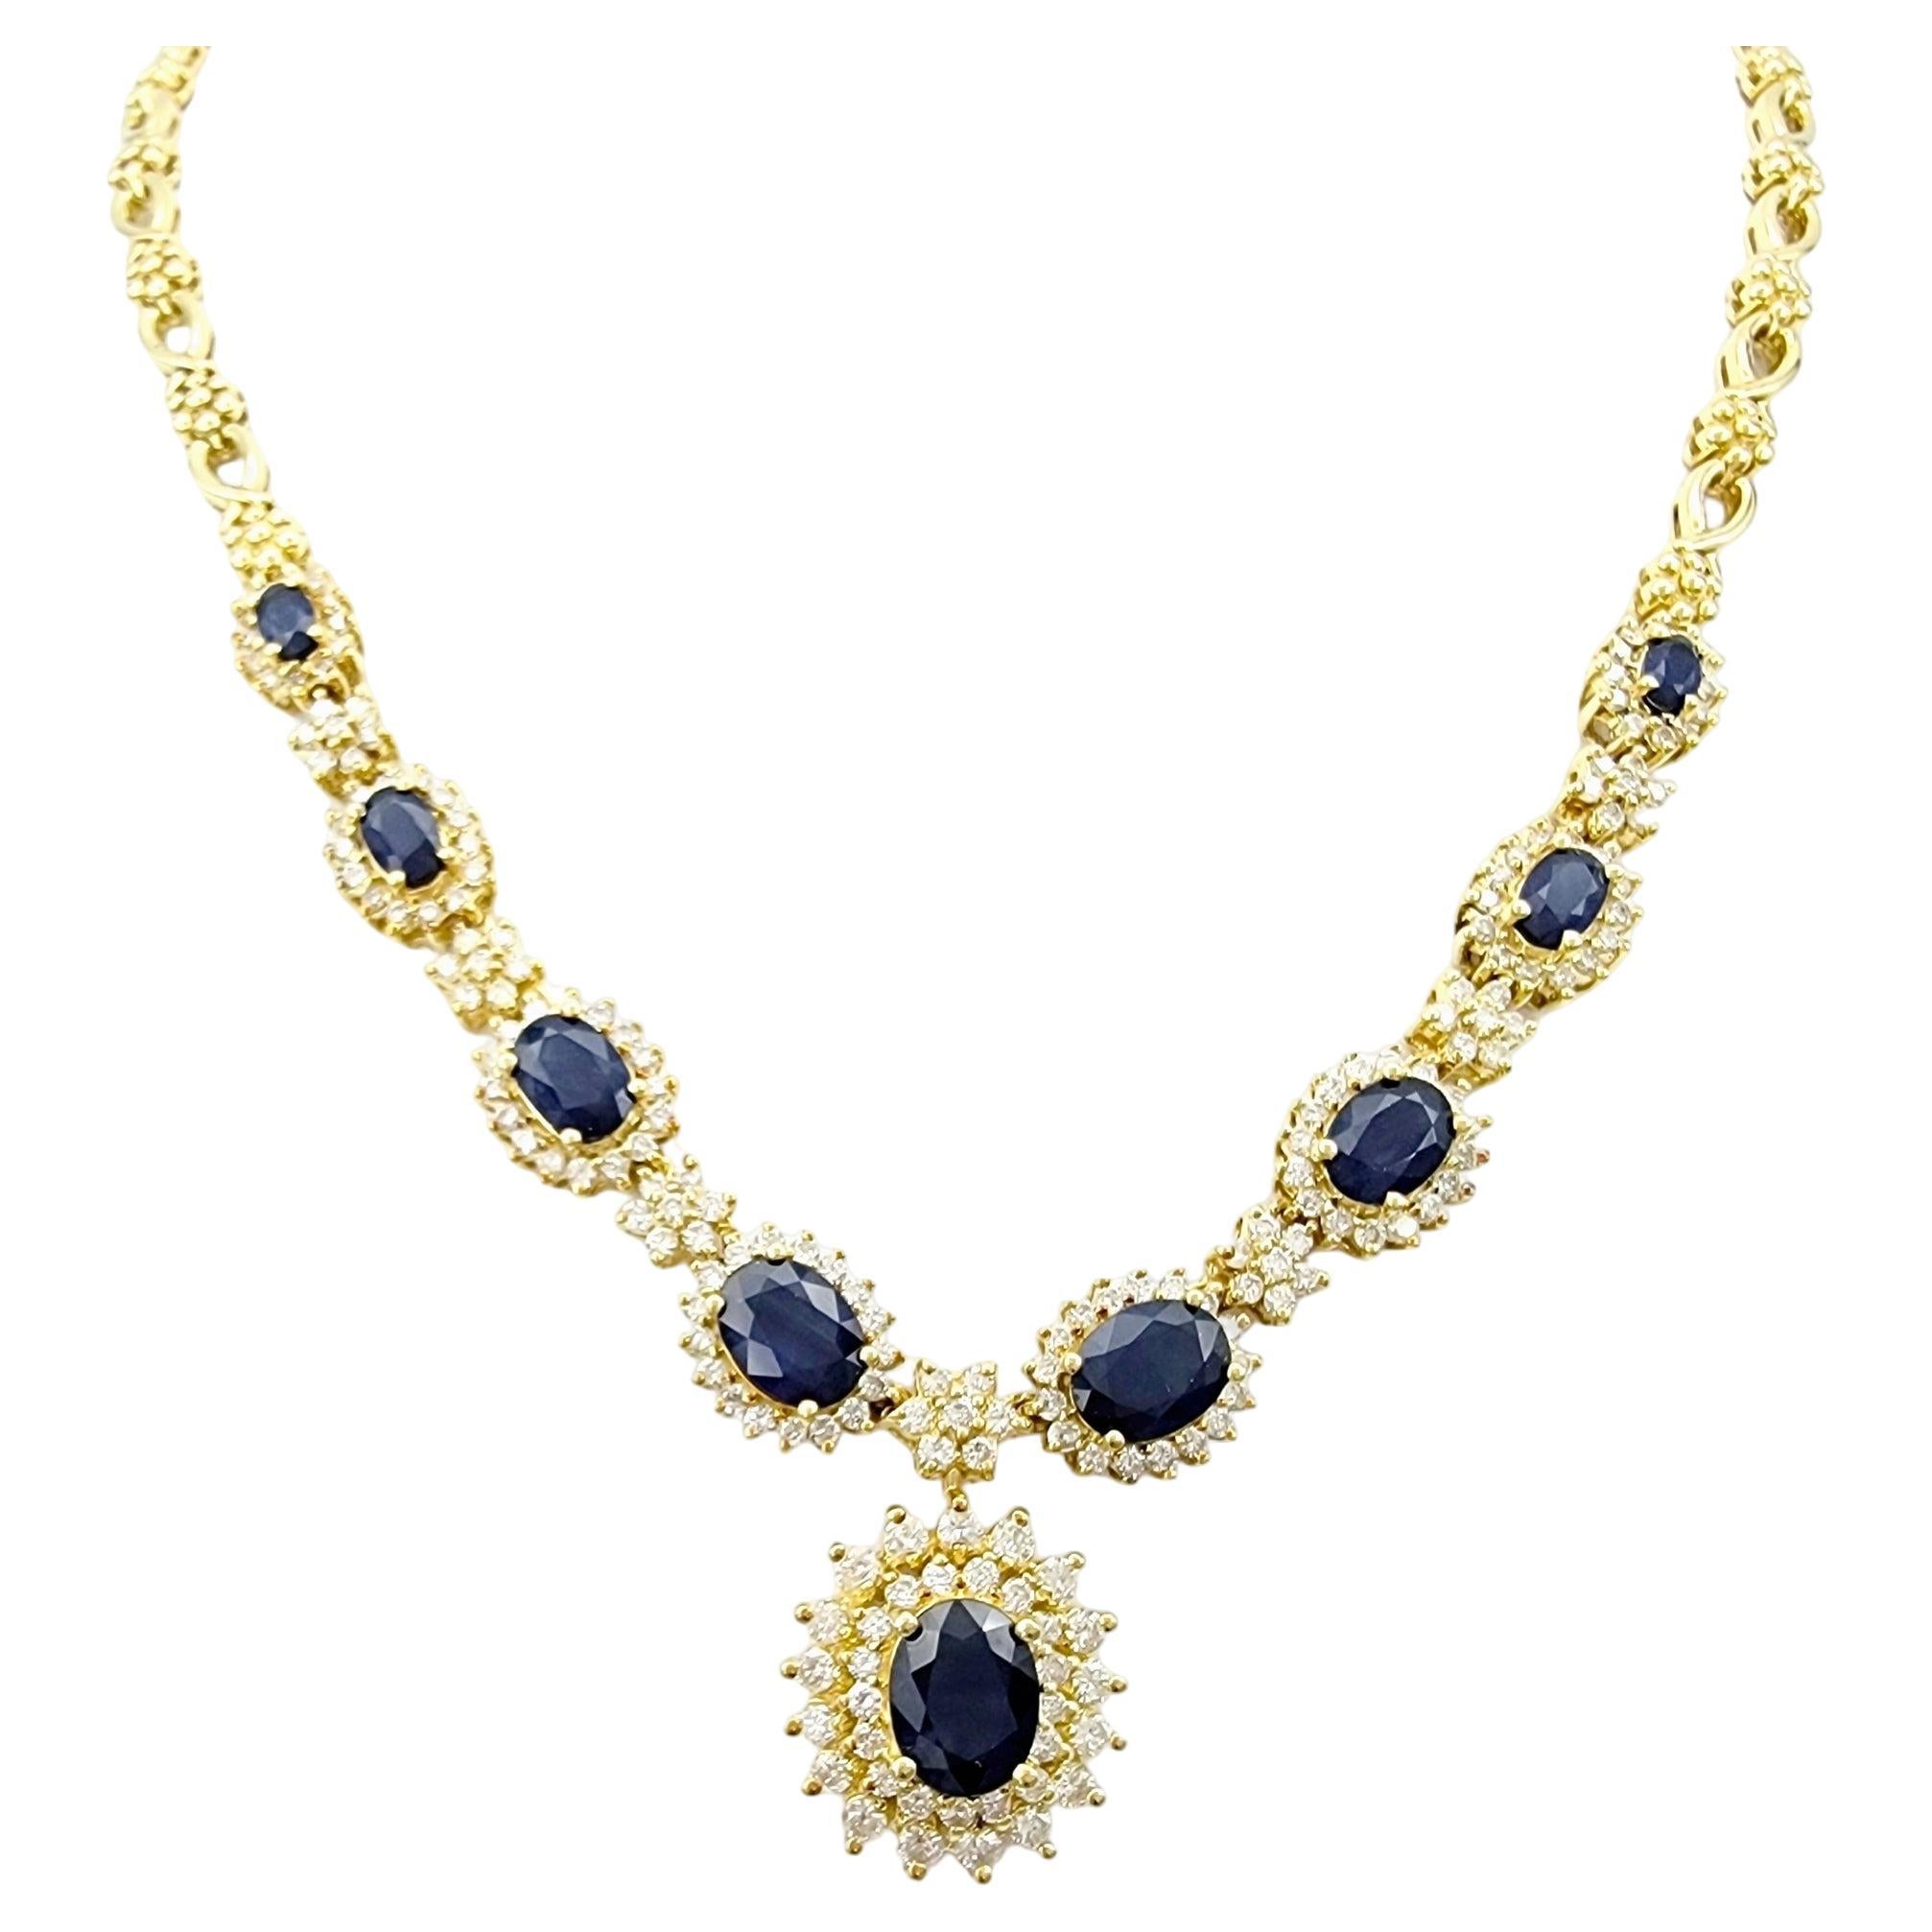 Hammerman Brothers Blue Sapphire and Diamond Necklace in 18 Karat Yellow Gold